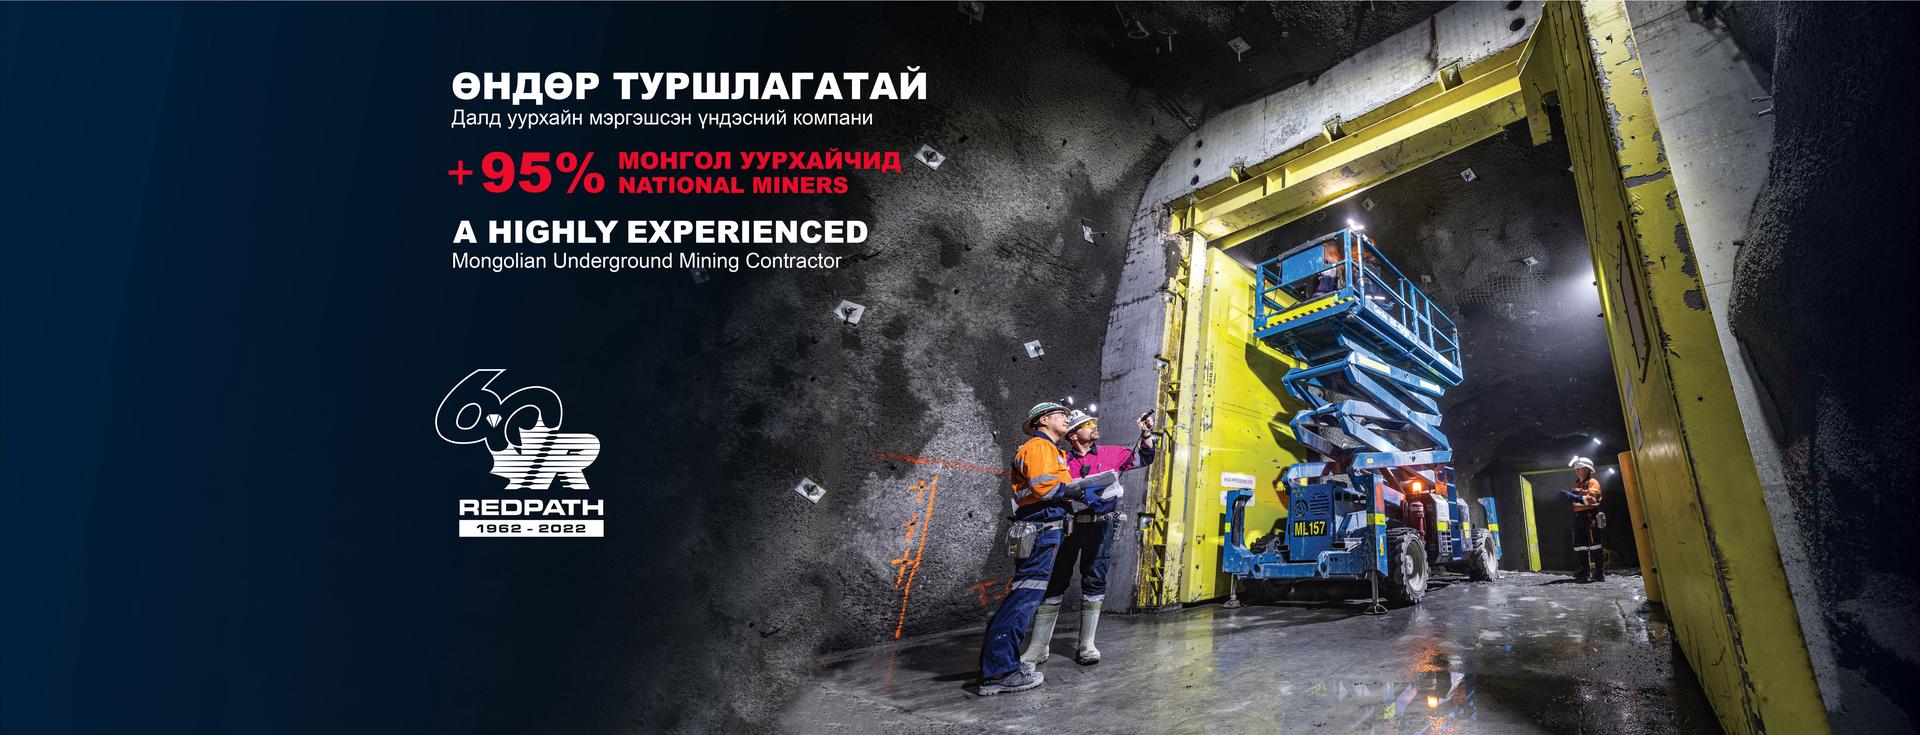 A HIGHLY EXPERIENCED Mongolian Underground Mining Contractor with a workforce greater than  90% NATIONAL EMPLOYEES